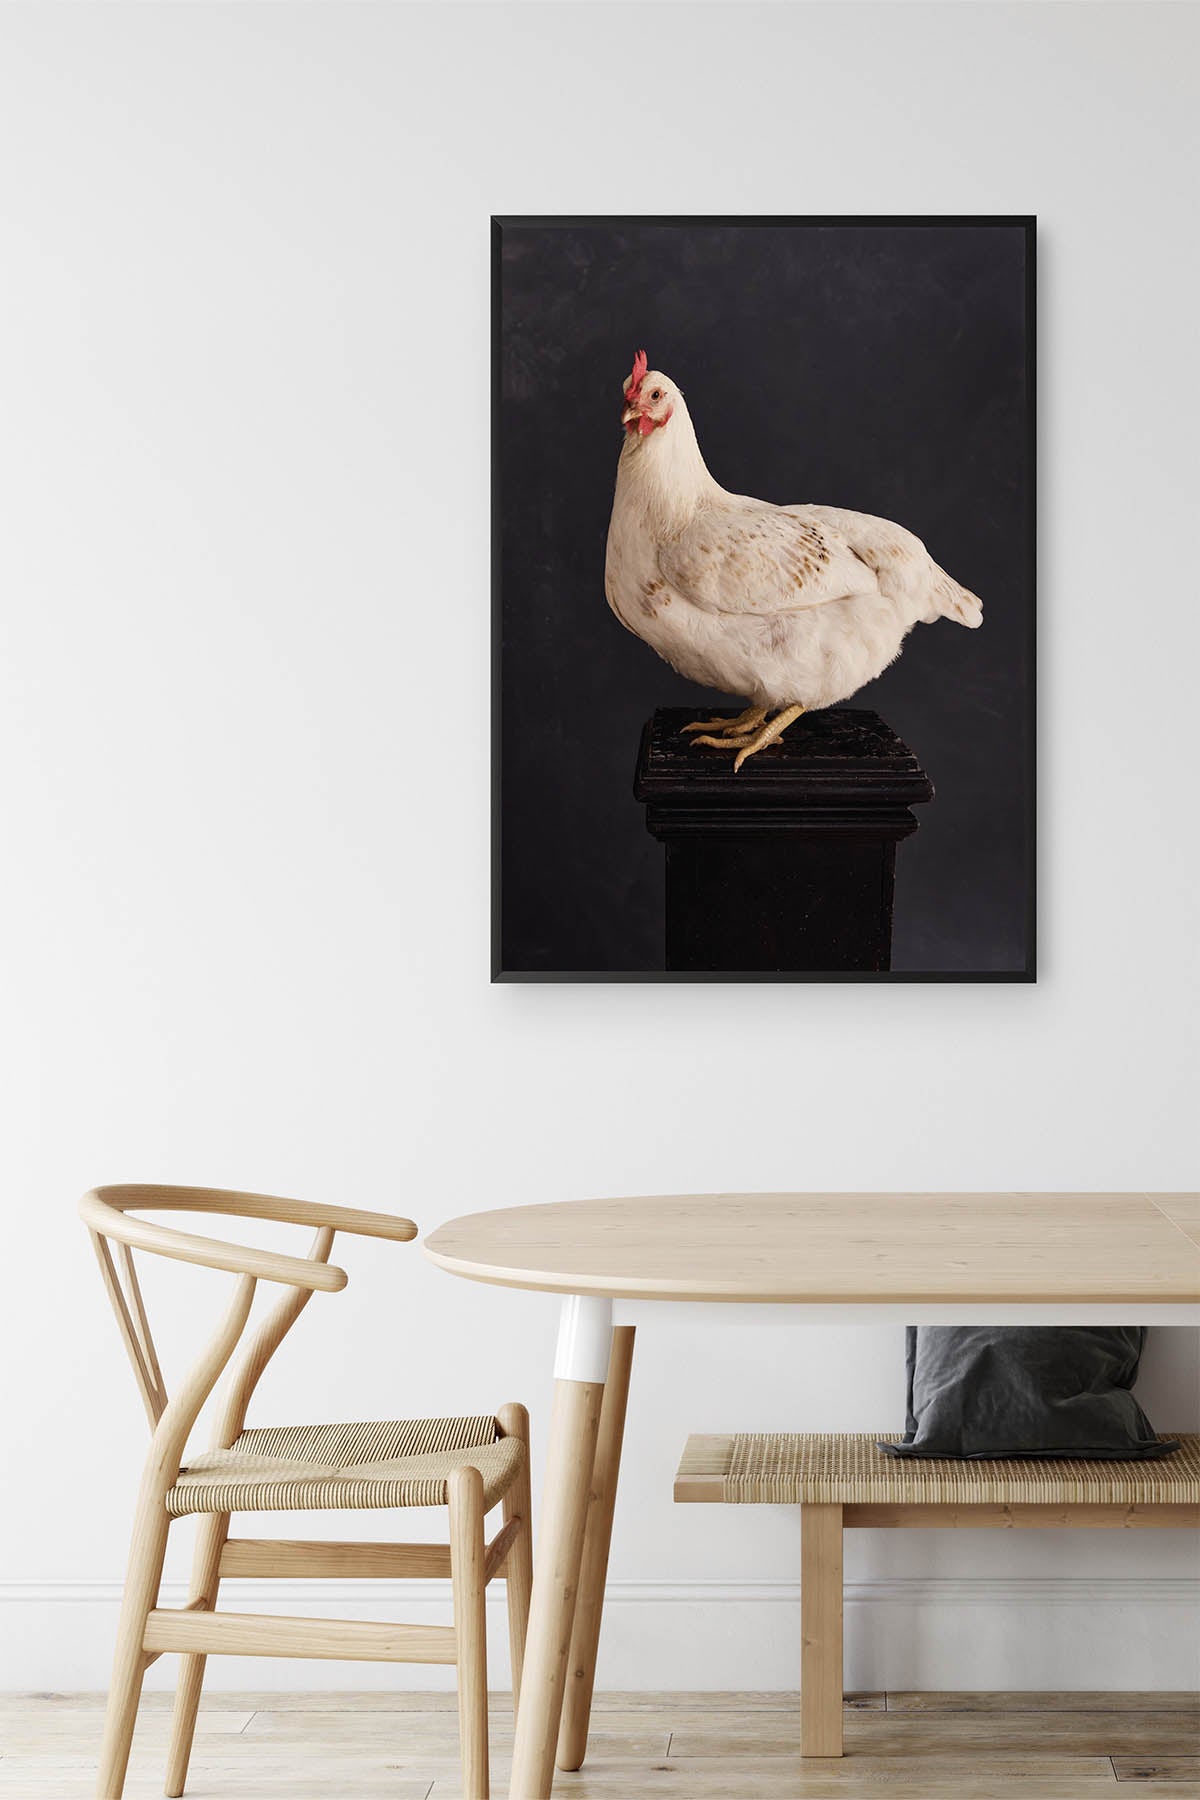 Fine Art Print Of A White Chicken Standing On A Black Plinth With A Black Background Framed On A Wall In An European Style Dining Nook With Light Oak Wishbone Chairs. 